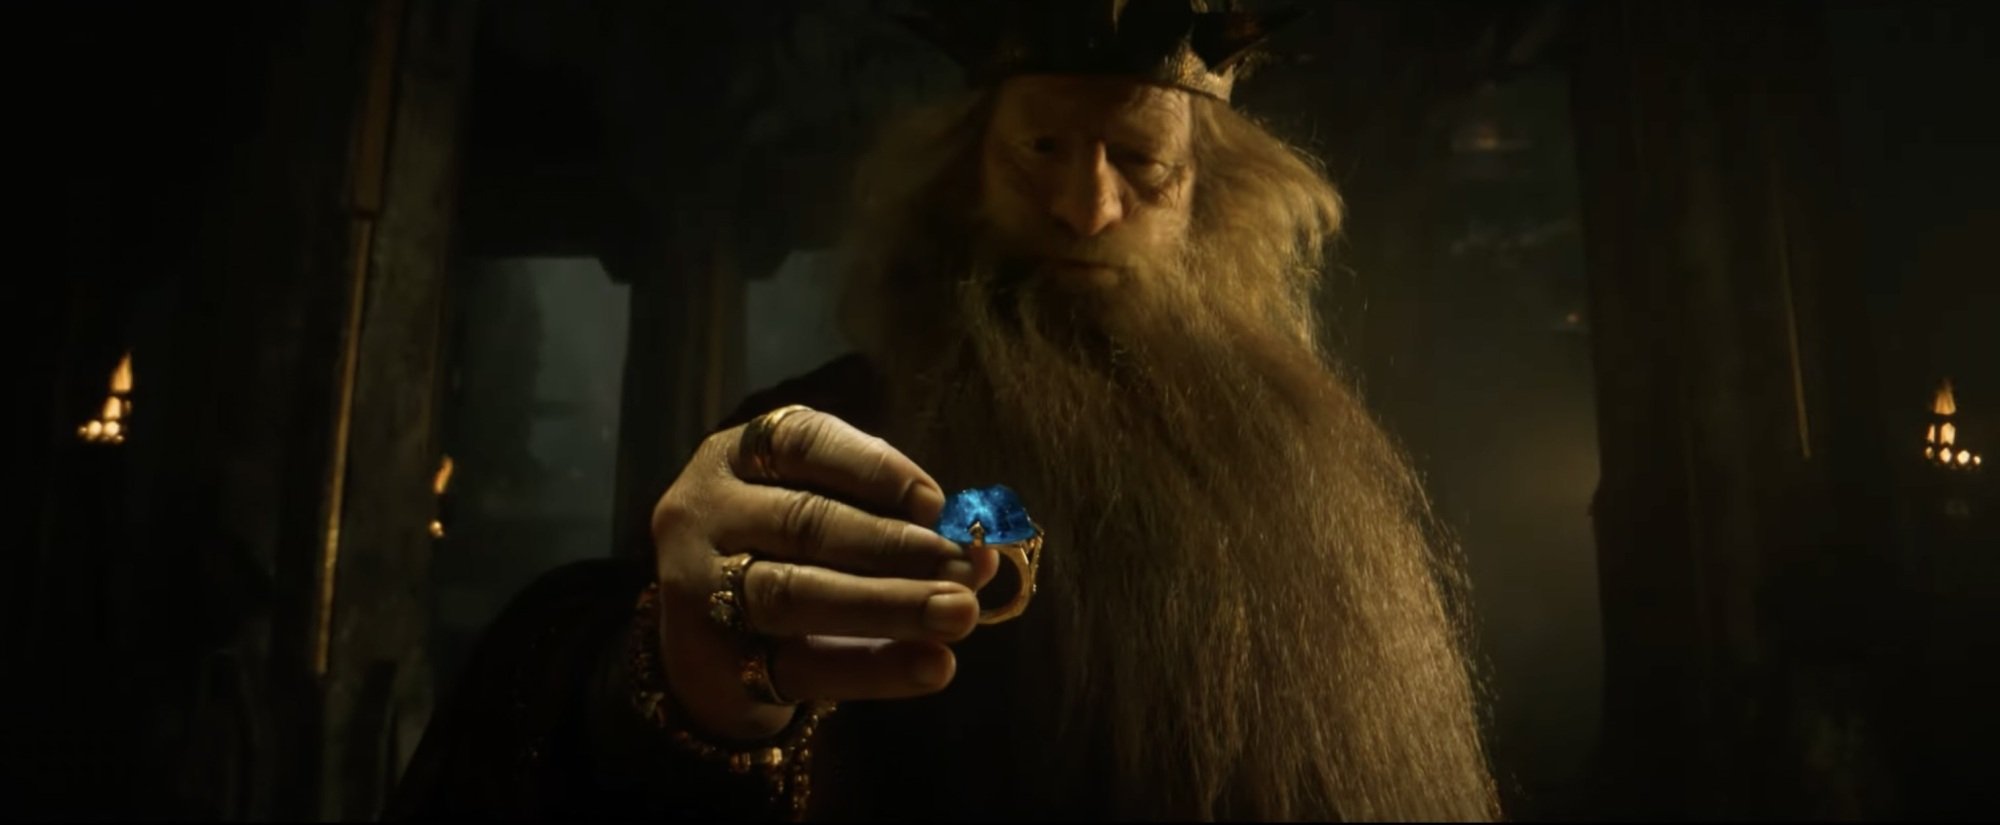 Peter Mullan as Durin III in "The Lord of the Rings: The Rings of Power."